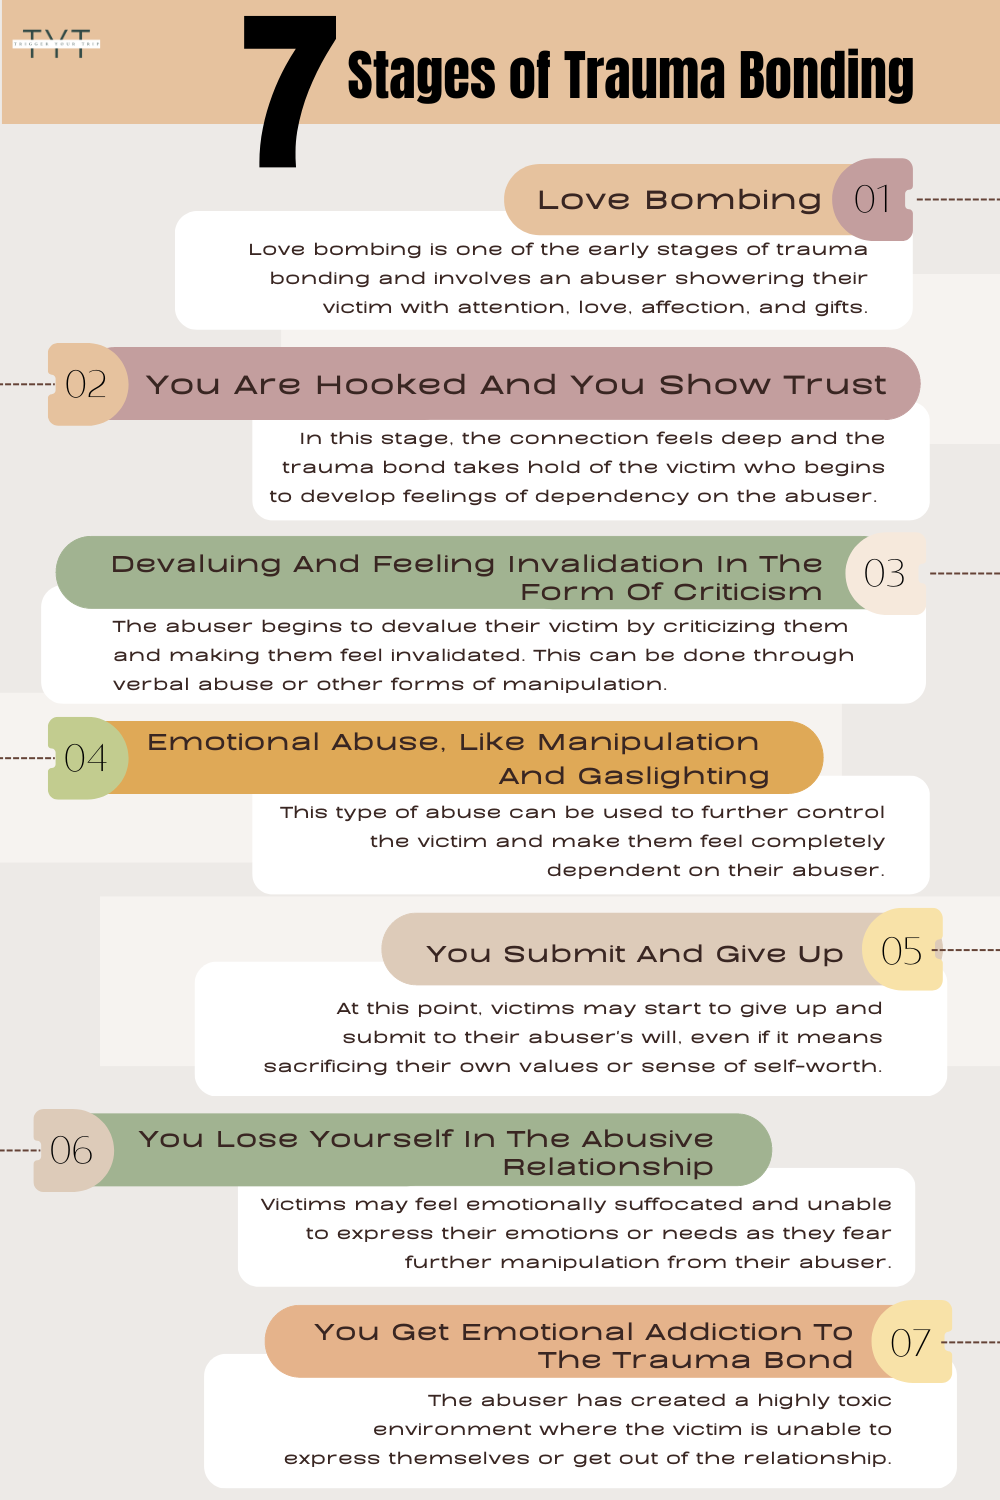 trauma bond relationship in the stages of trauma and infographic for trauma nformed care and healthy relationships 